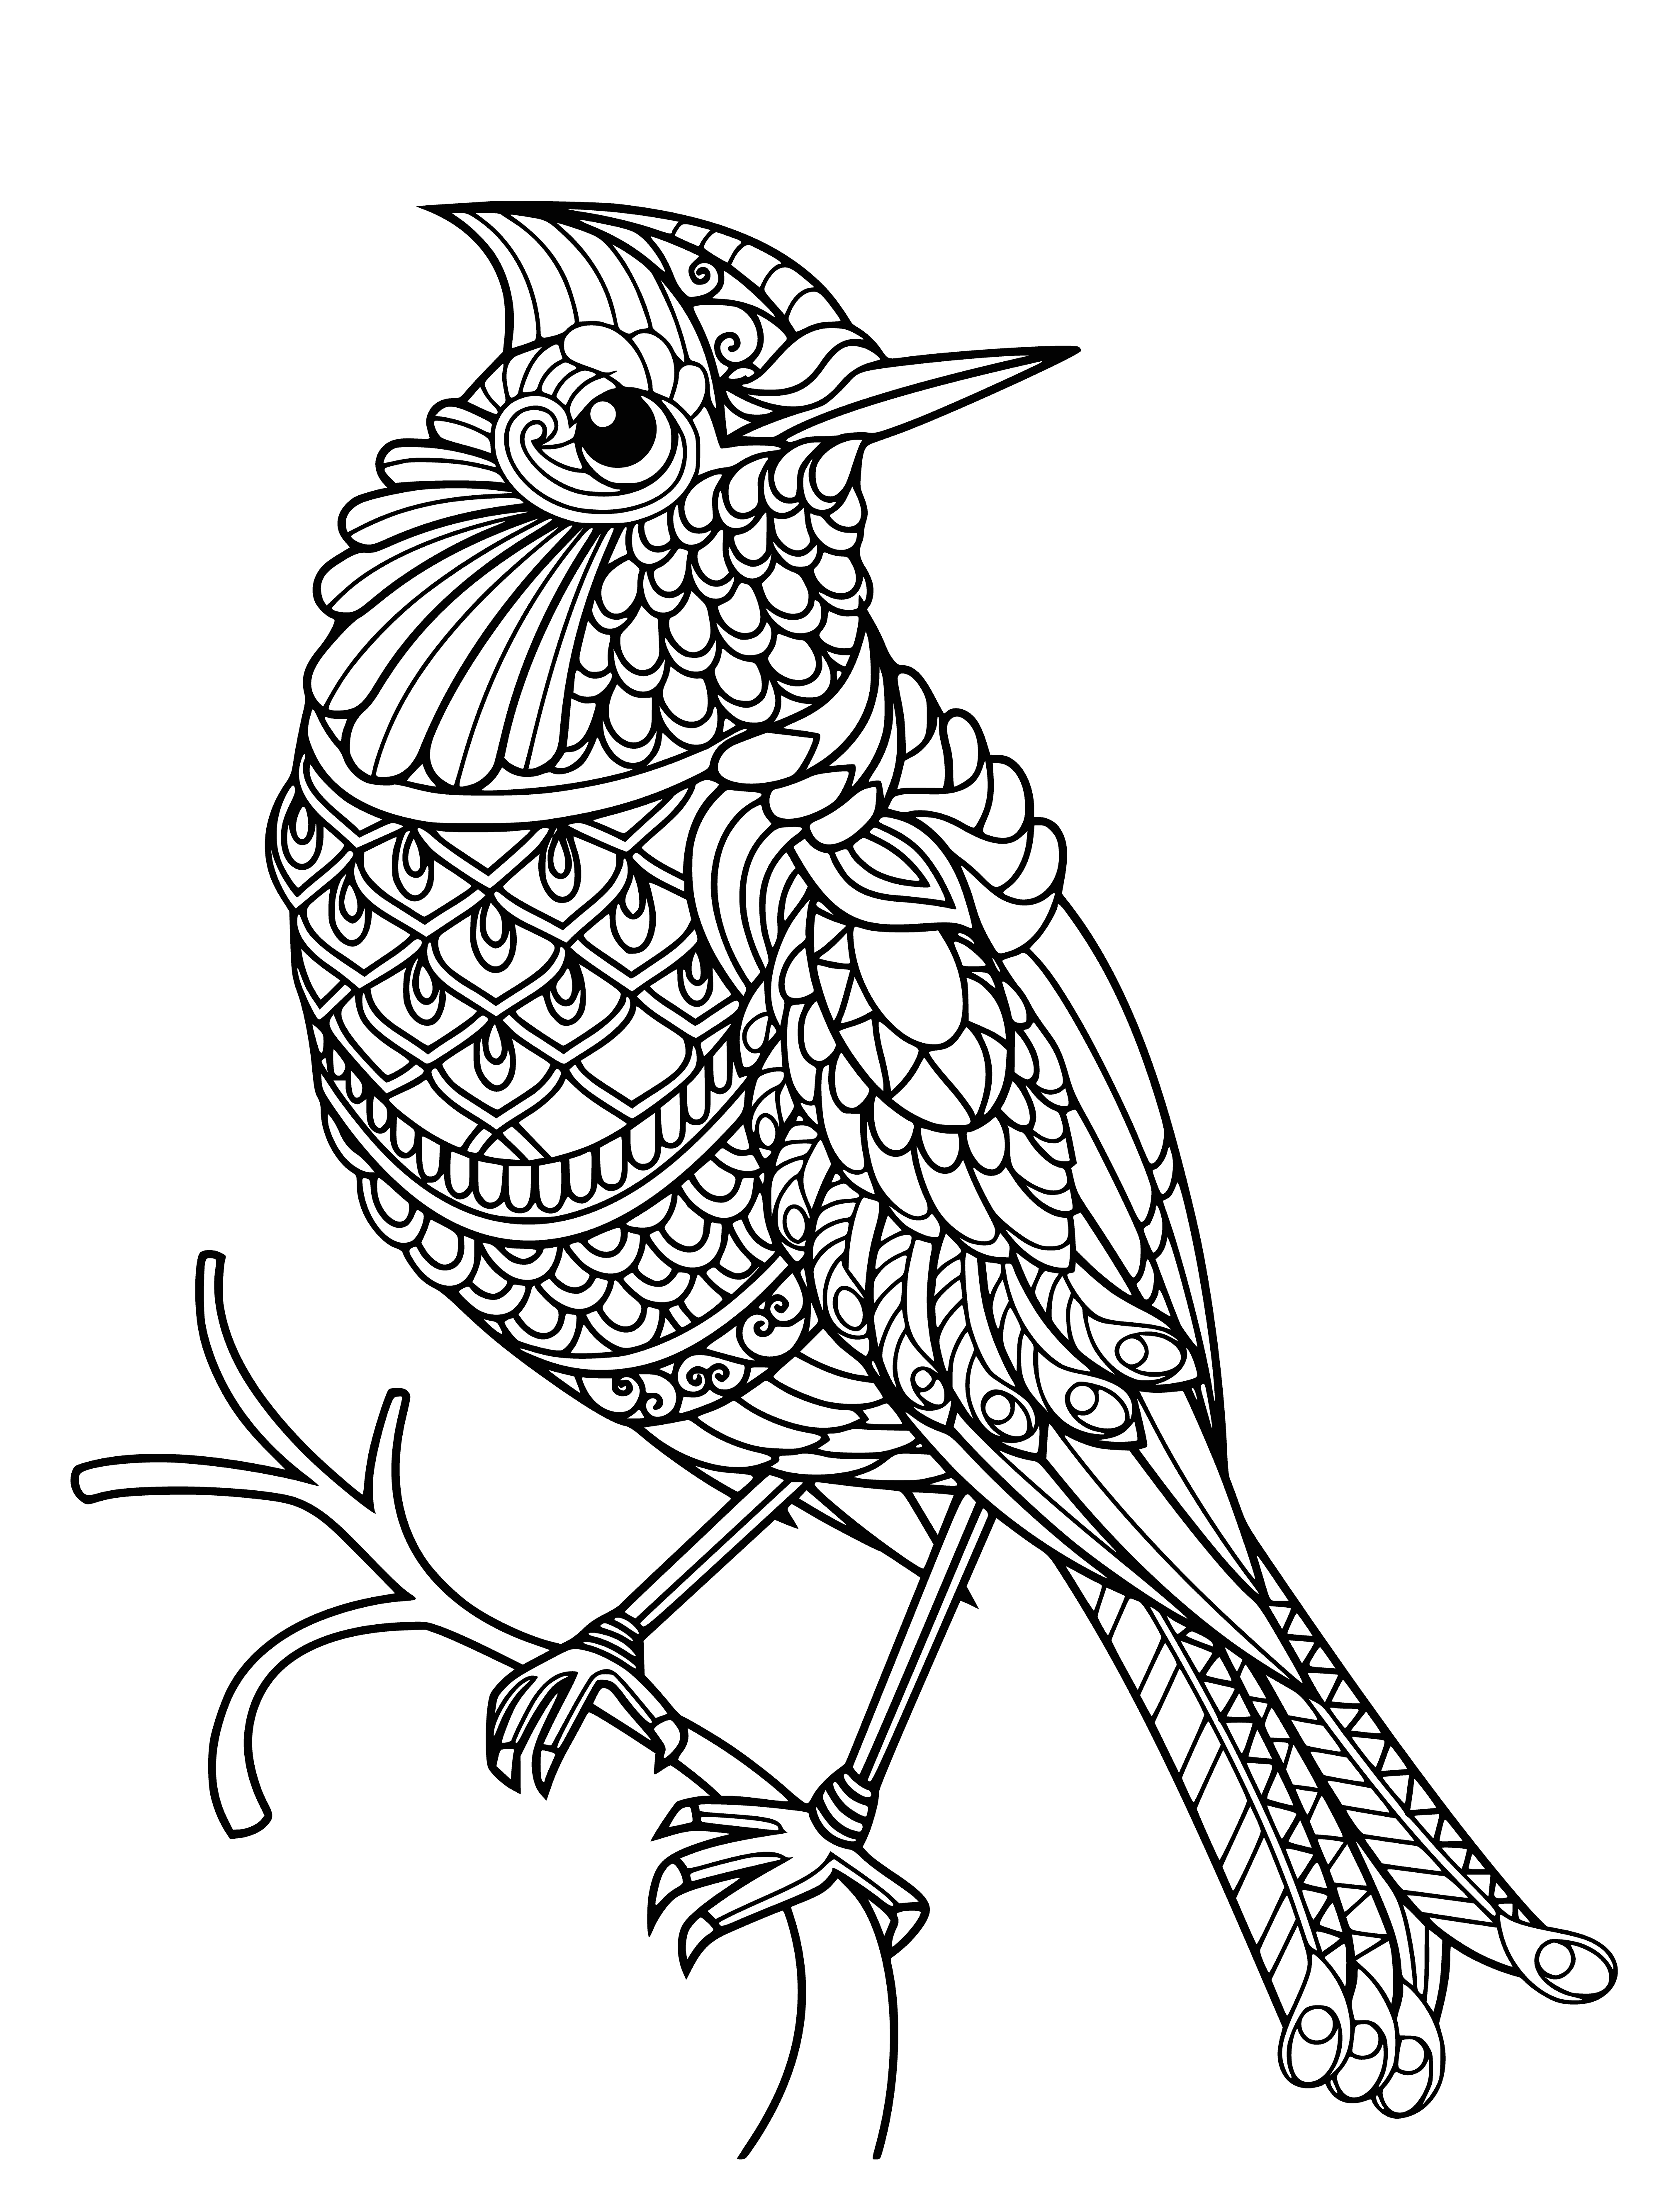 coloring page: A bird relaxes on a branch, head lowered, eyes closed, enjoying the moment.